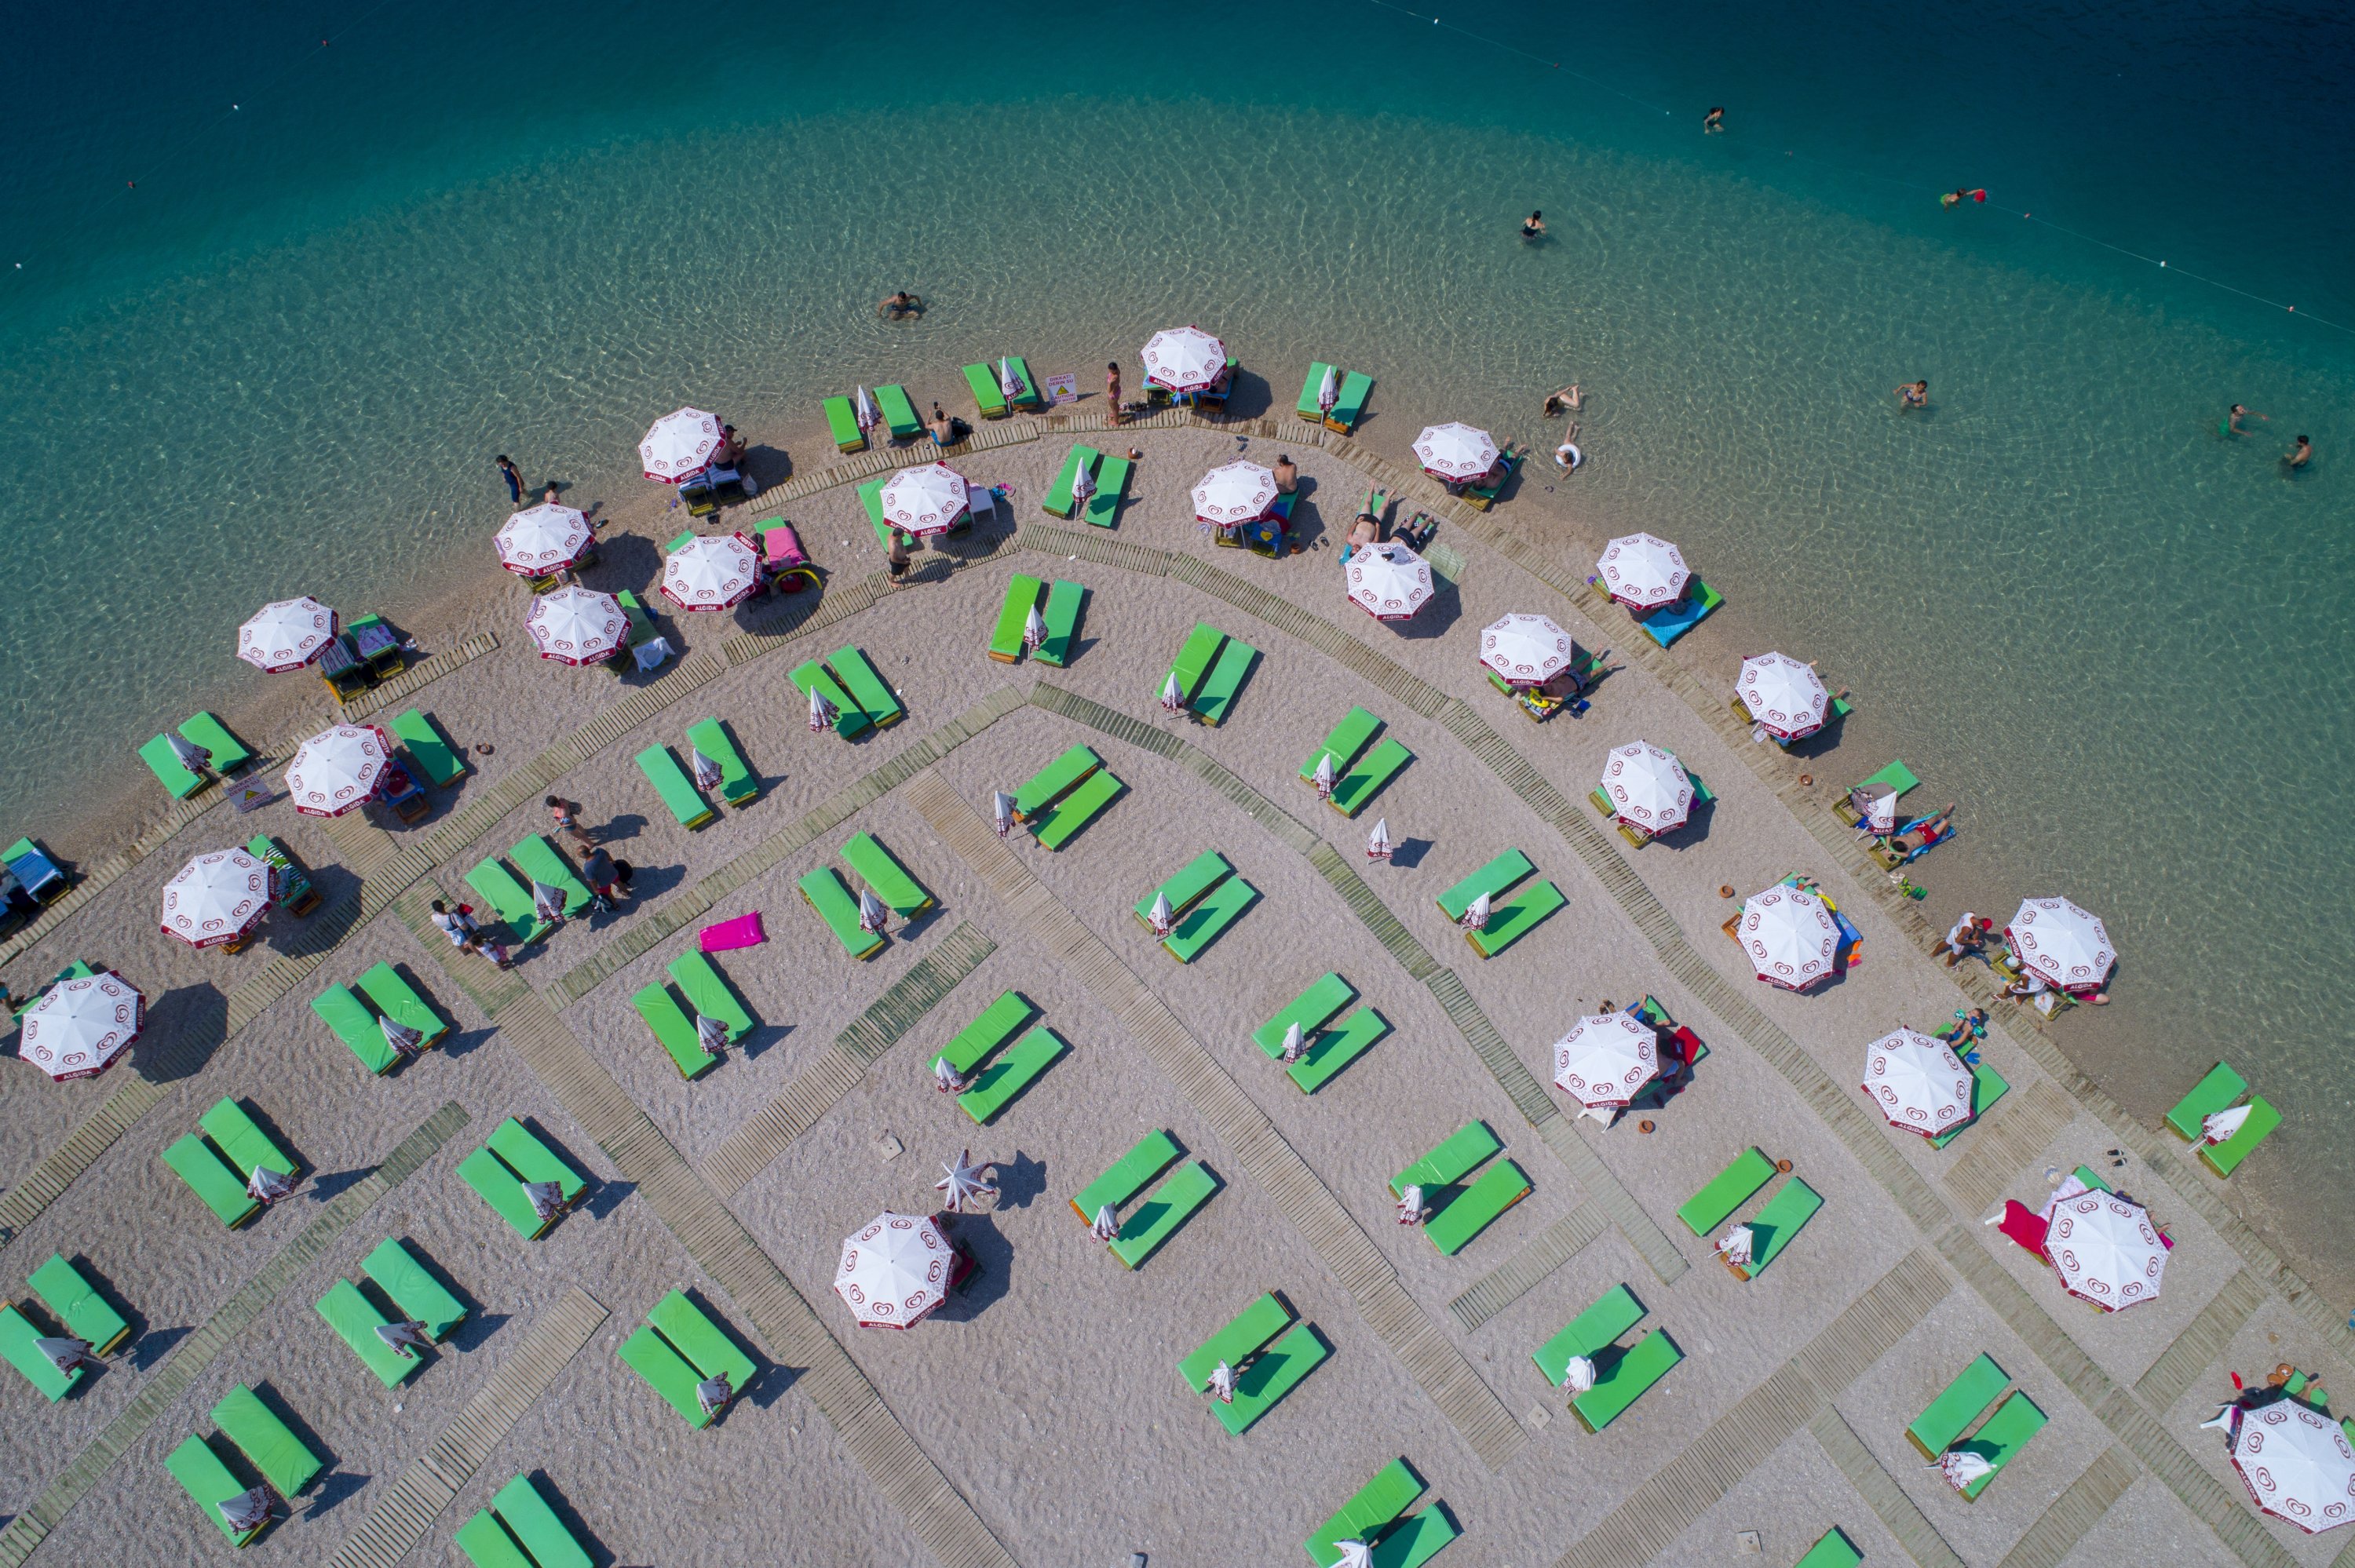 Sunbeds and umbrellas have been placed at least 1.5 meters apart at Ölüdeniz Beach in Fethiye, Muğla province, Turkey. (AA Photo)